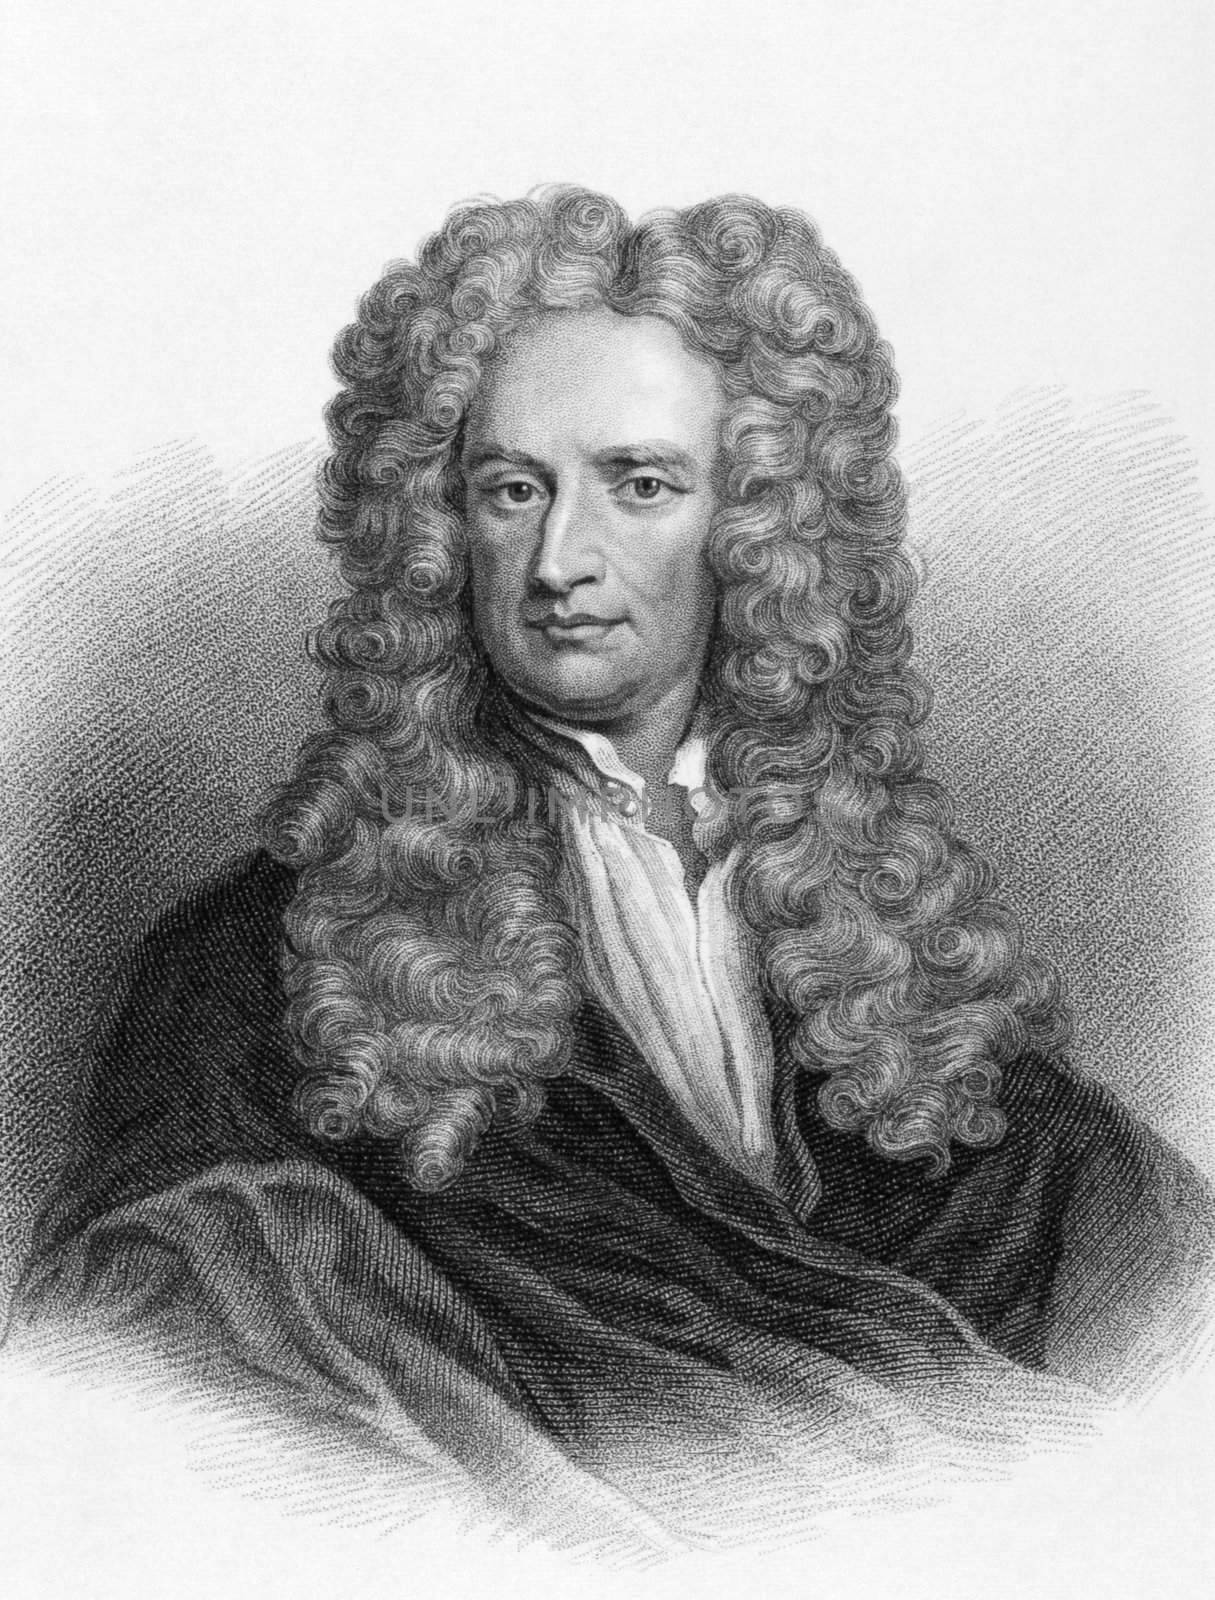 Isaac Newton on engraving from the 1800s. One of the most influential scientists in history.